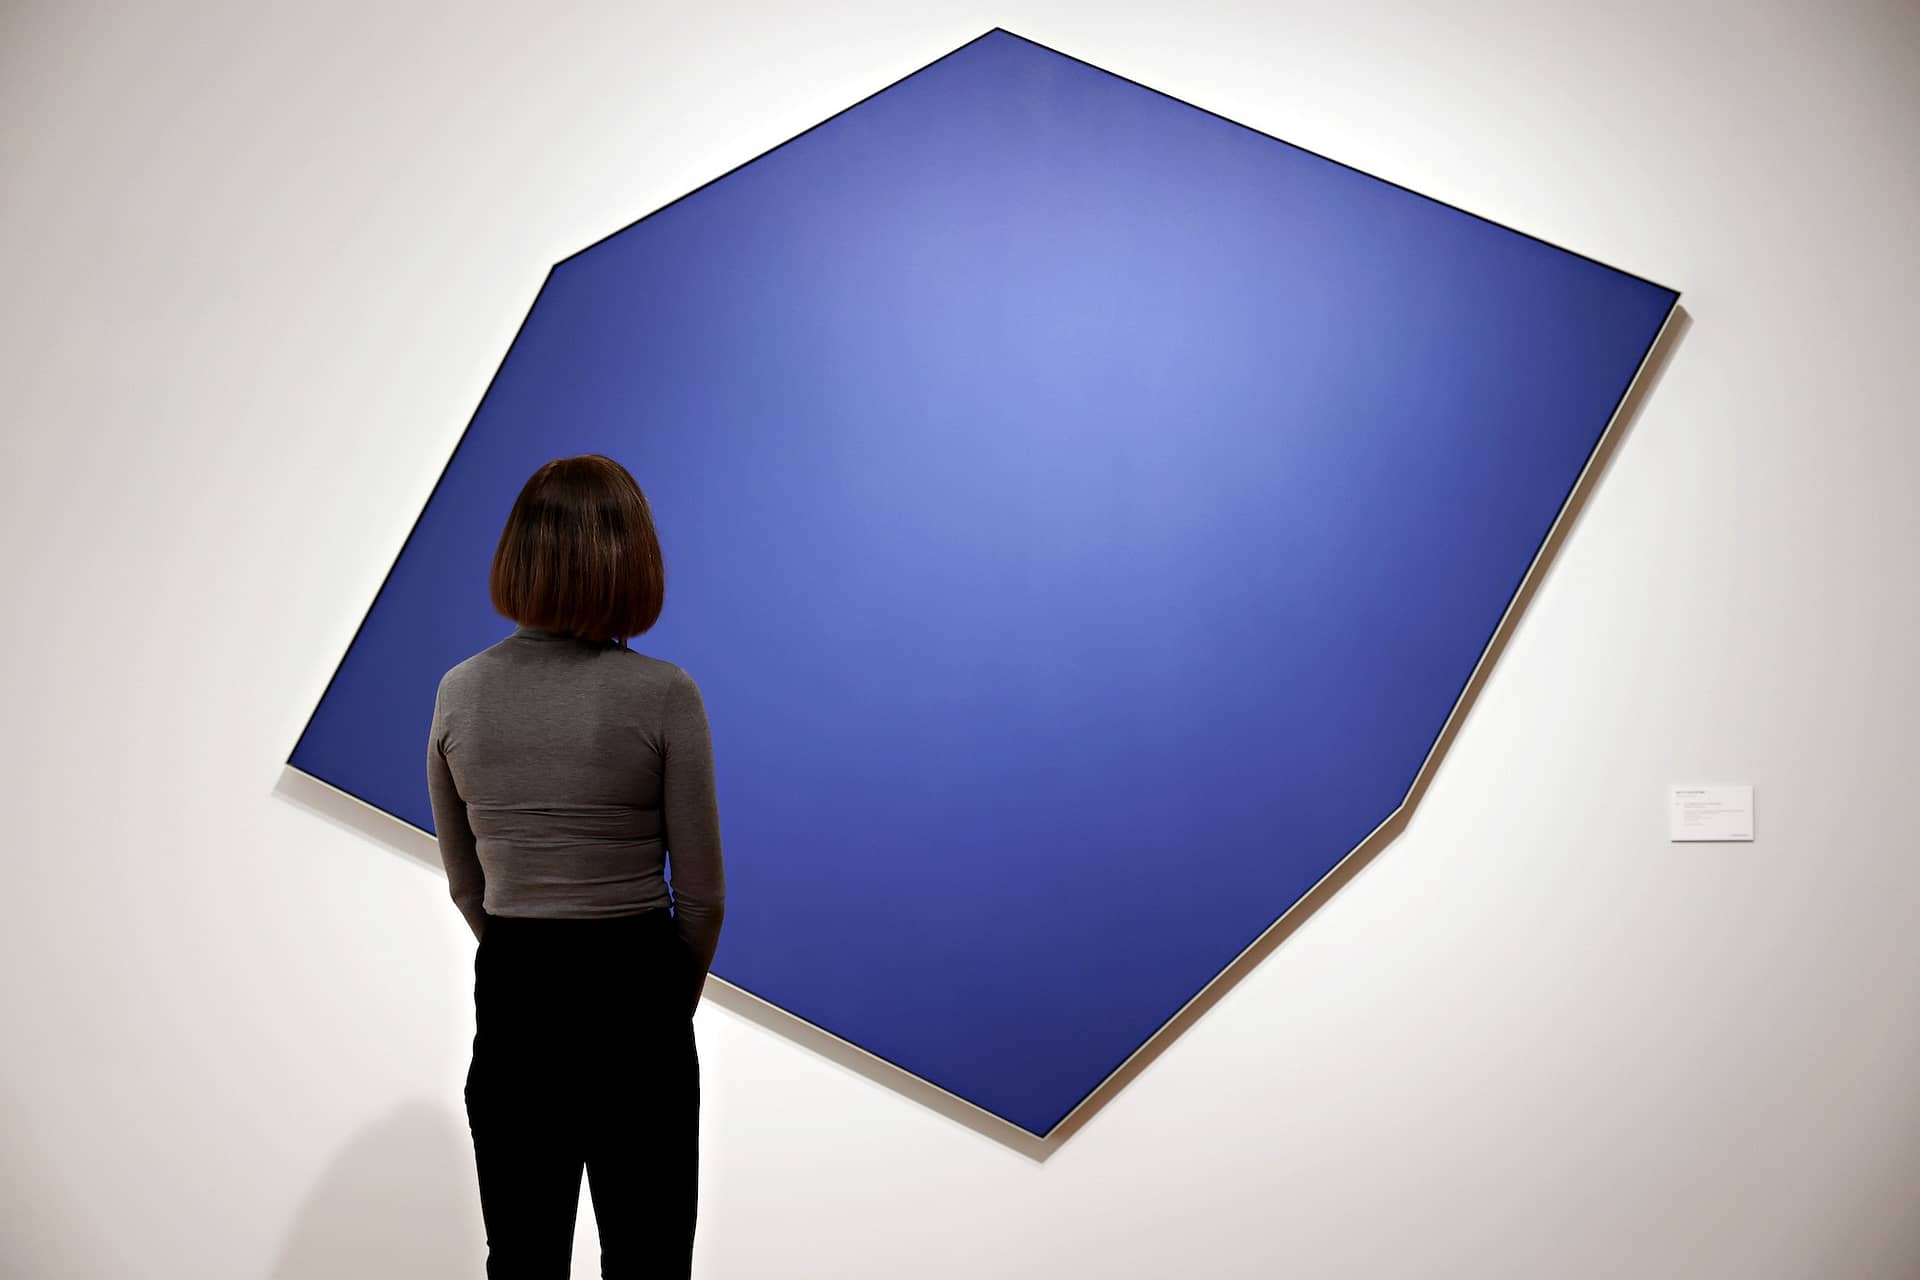 US Cities Declare May 31 “Ellsworth Kelly Day”